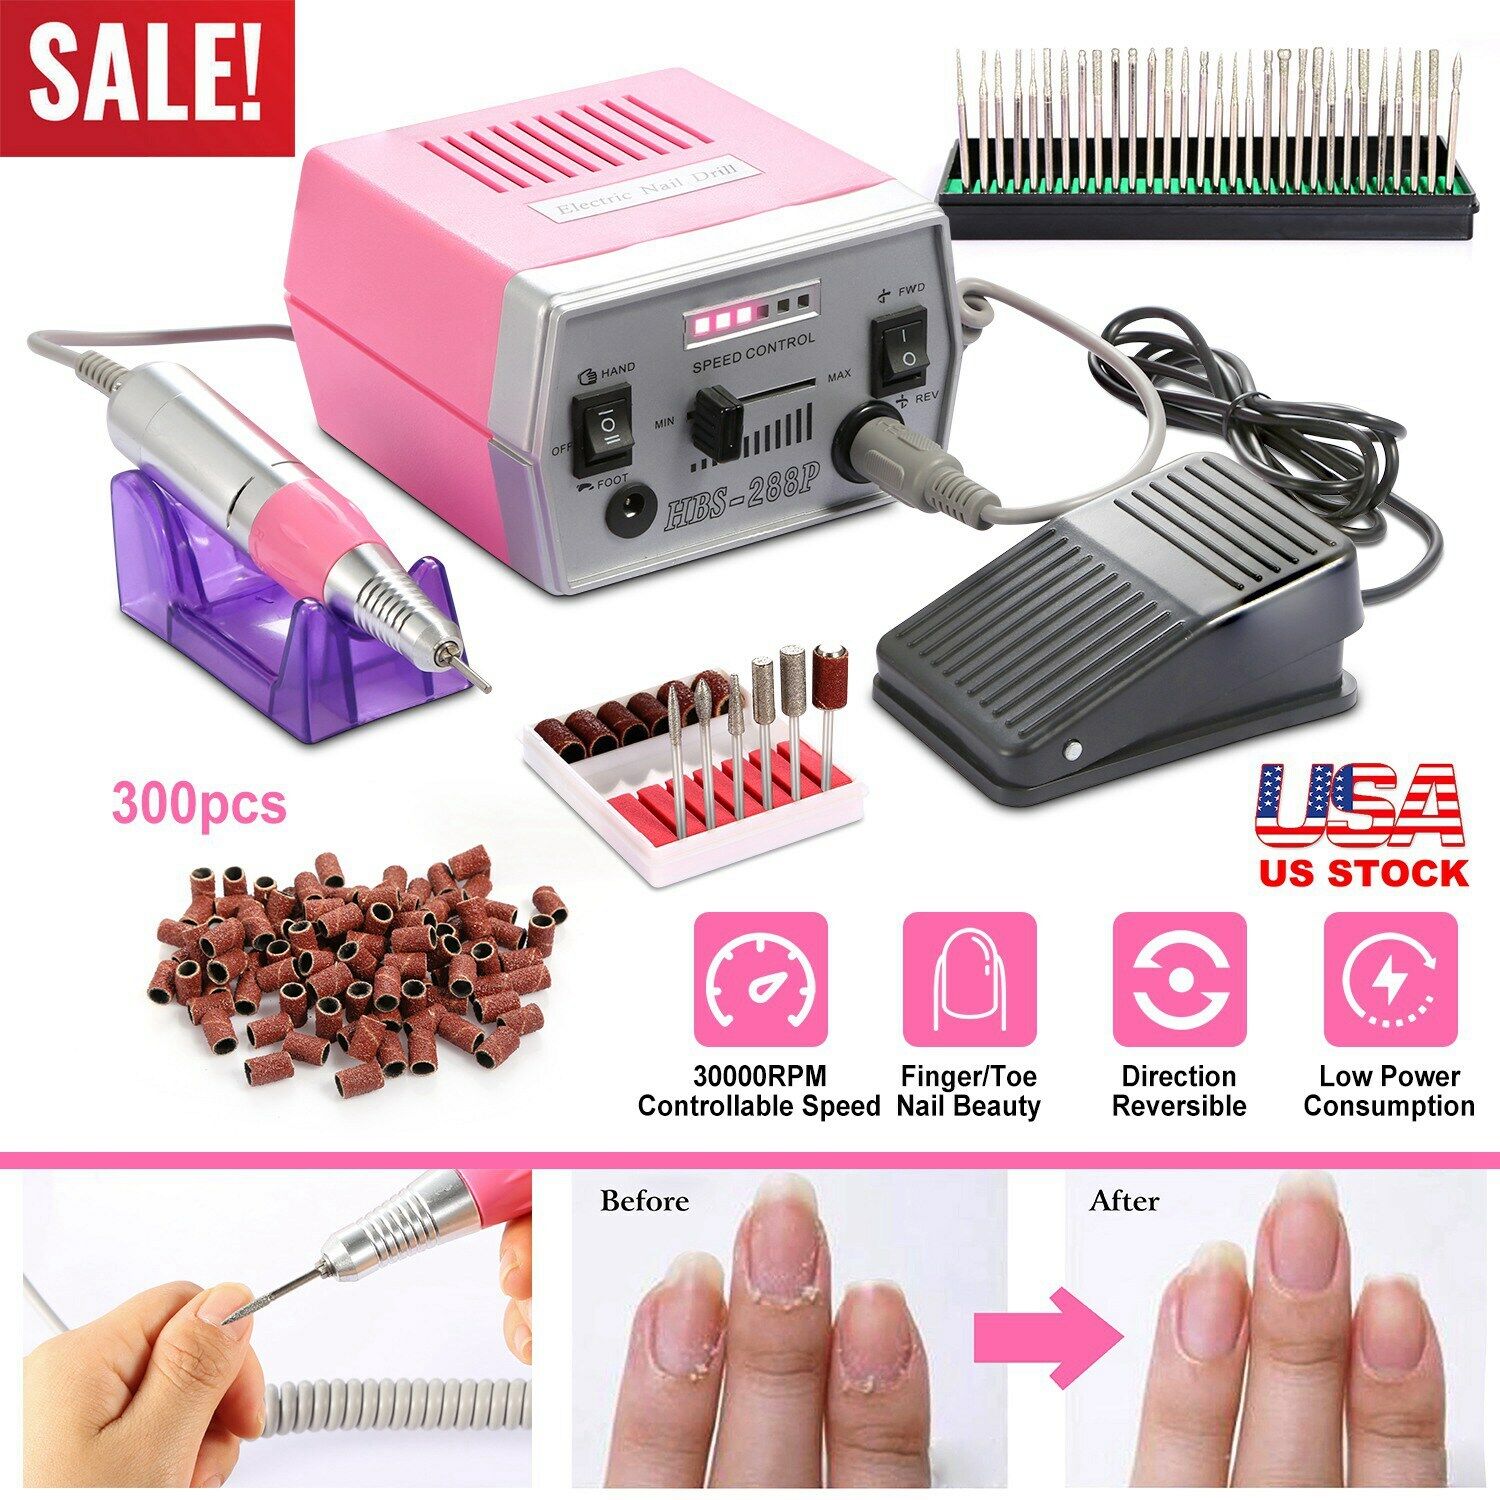 Professional Acrylic Electric Nail Drill RPM Max 62% OFF OFFicial site File 30000 Machine